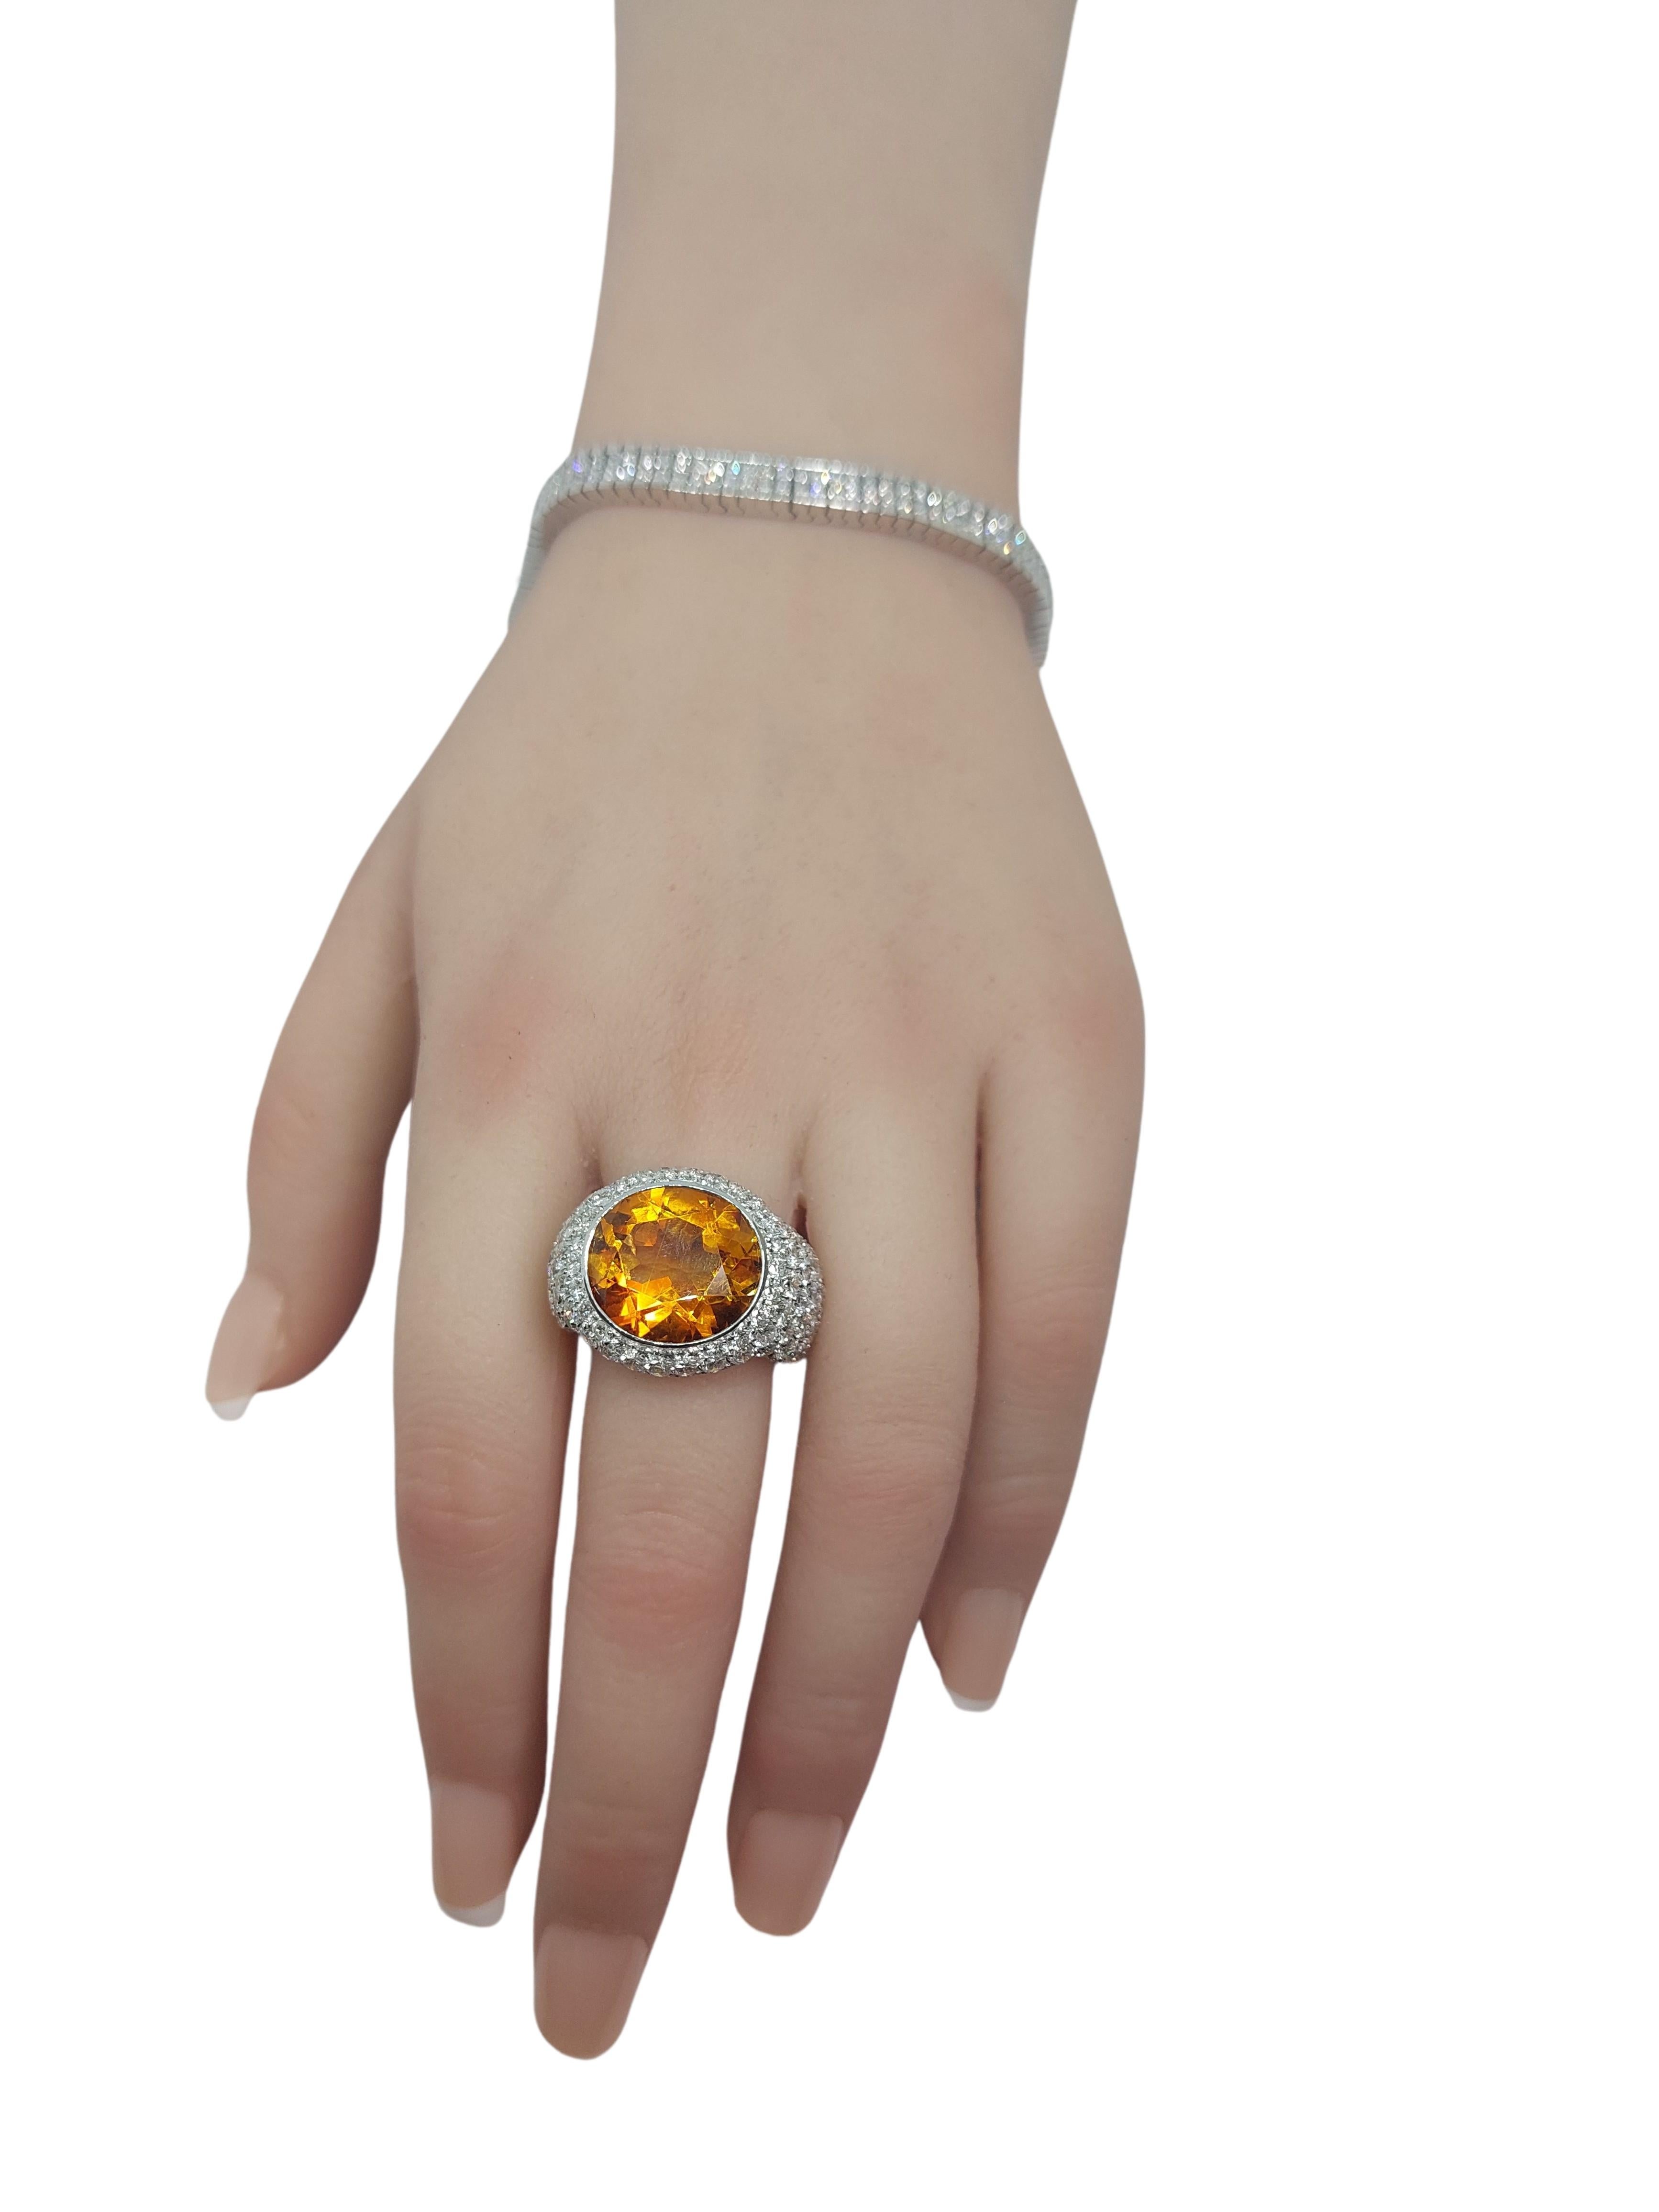 Stunning 18kt Solid White Gold Ring with 6.4ct Diamonds and Big Citrine Stone For Sale 1